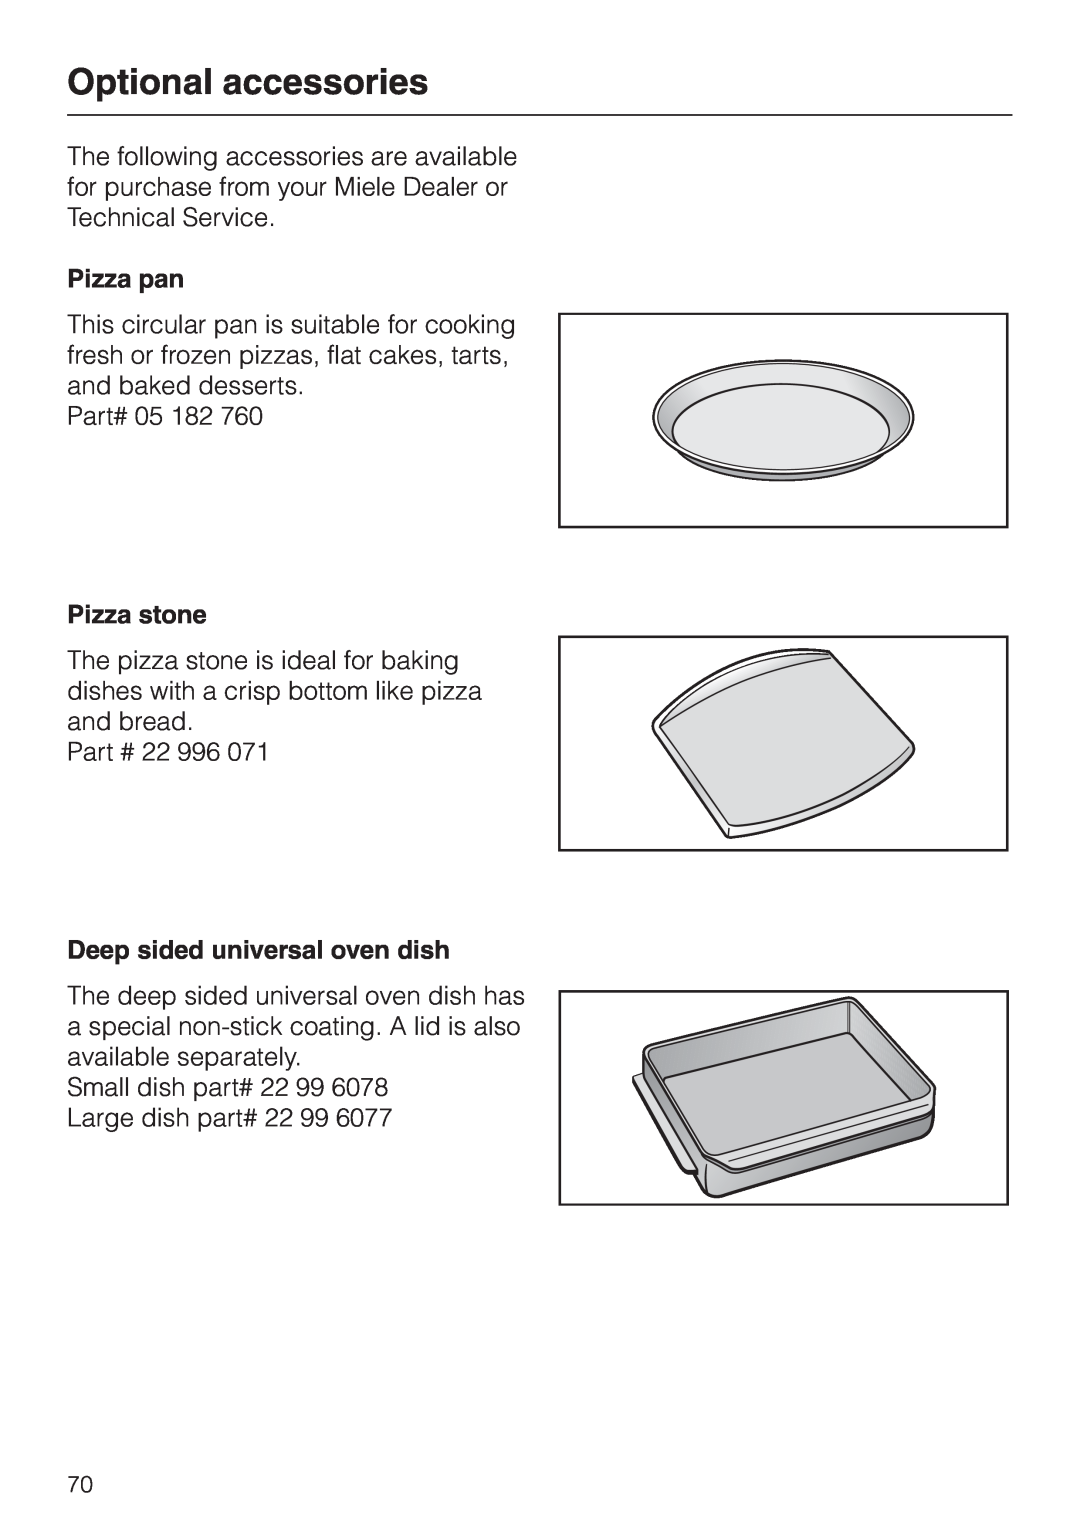 Miele H396B, H395B operating instructions Optional accessories, Pizza pan, Pizza stone, Deep sided universal oven dish 